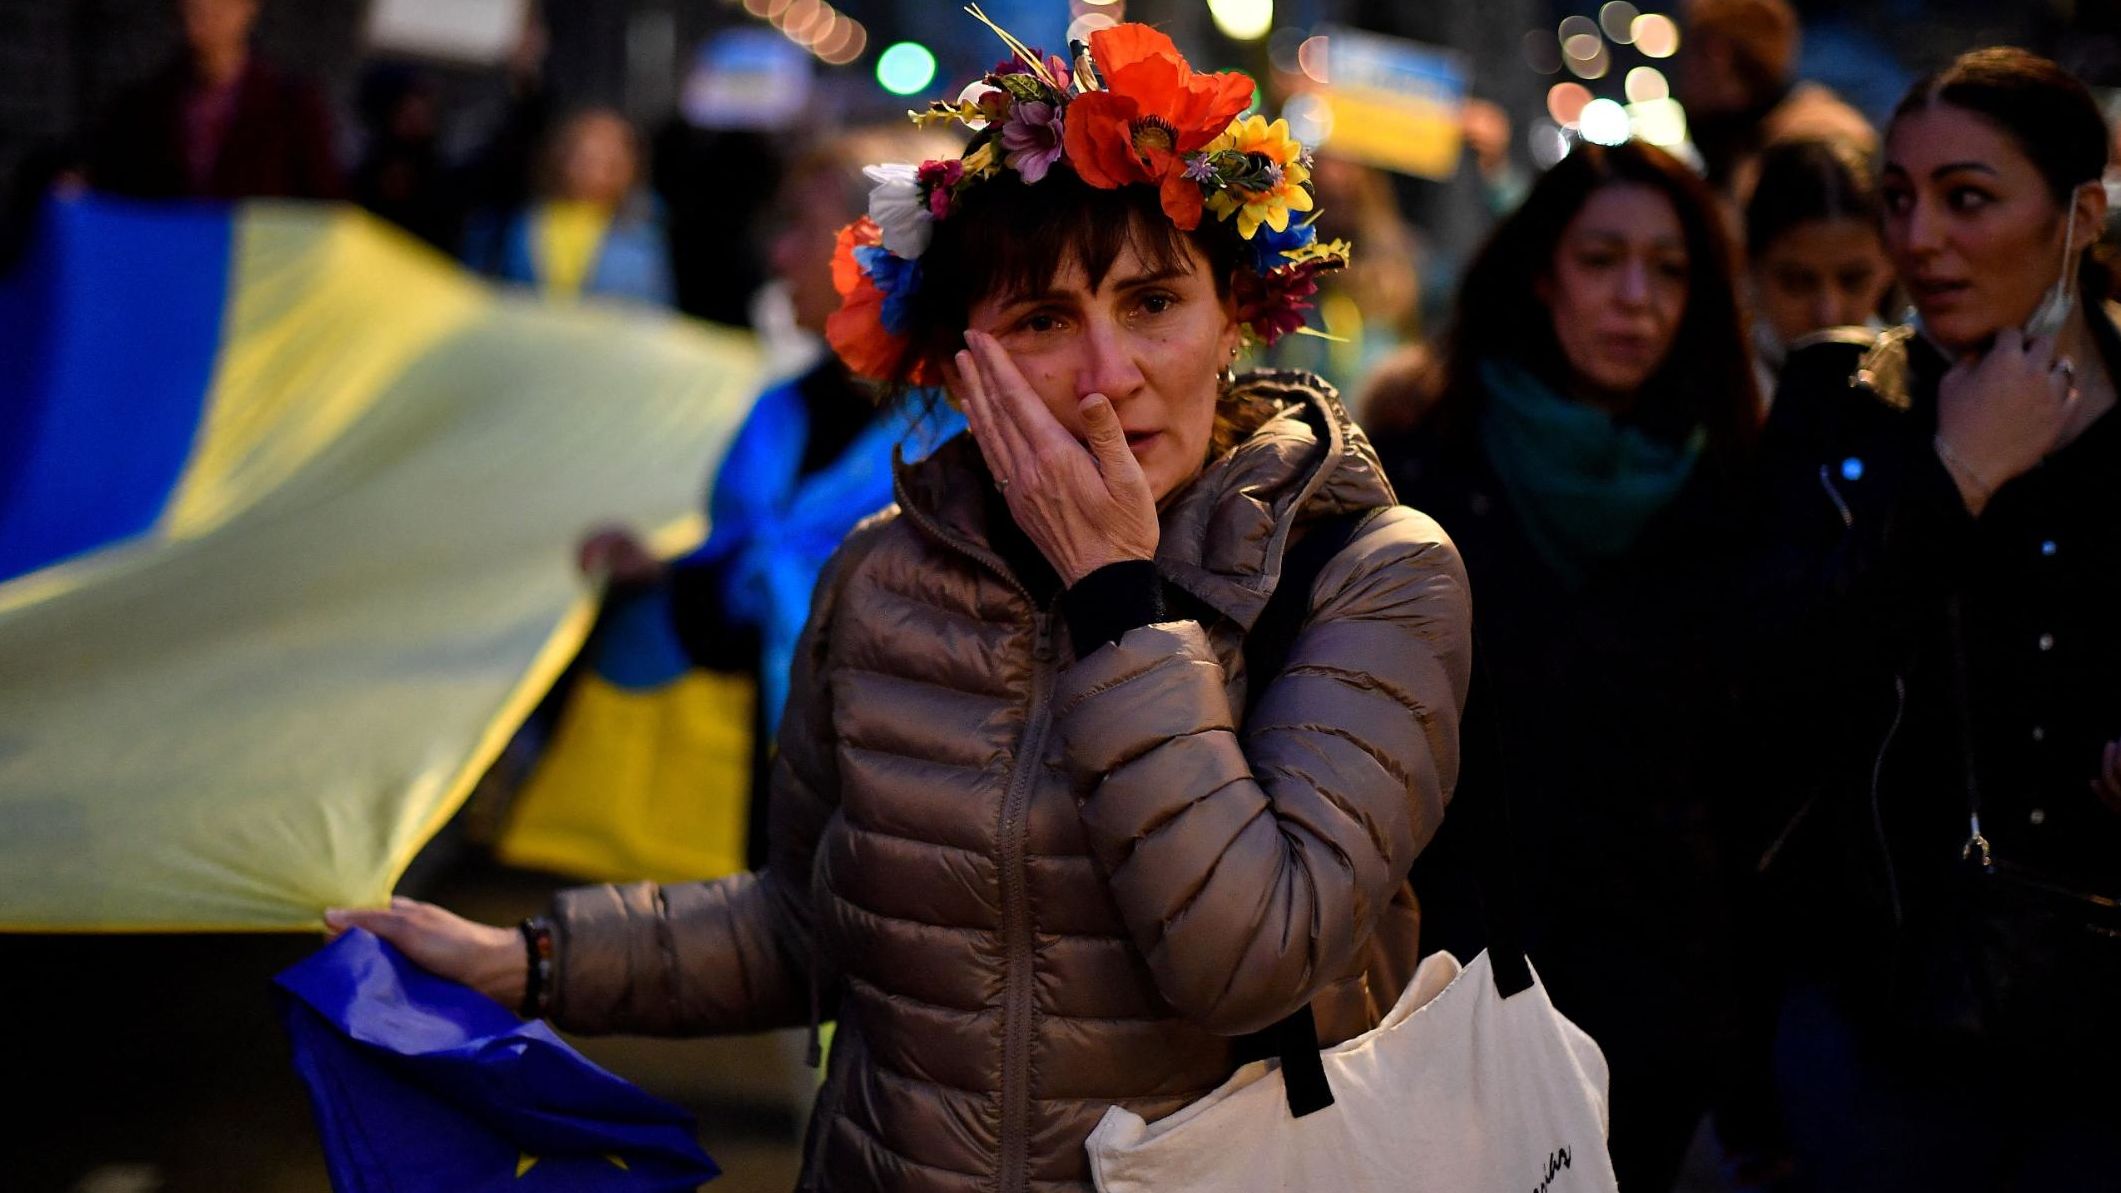 A demonstrator in Barcelona, Spain, cries during a protest on February 24.